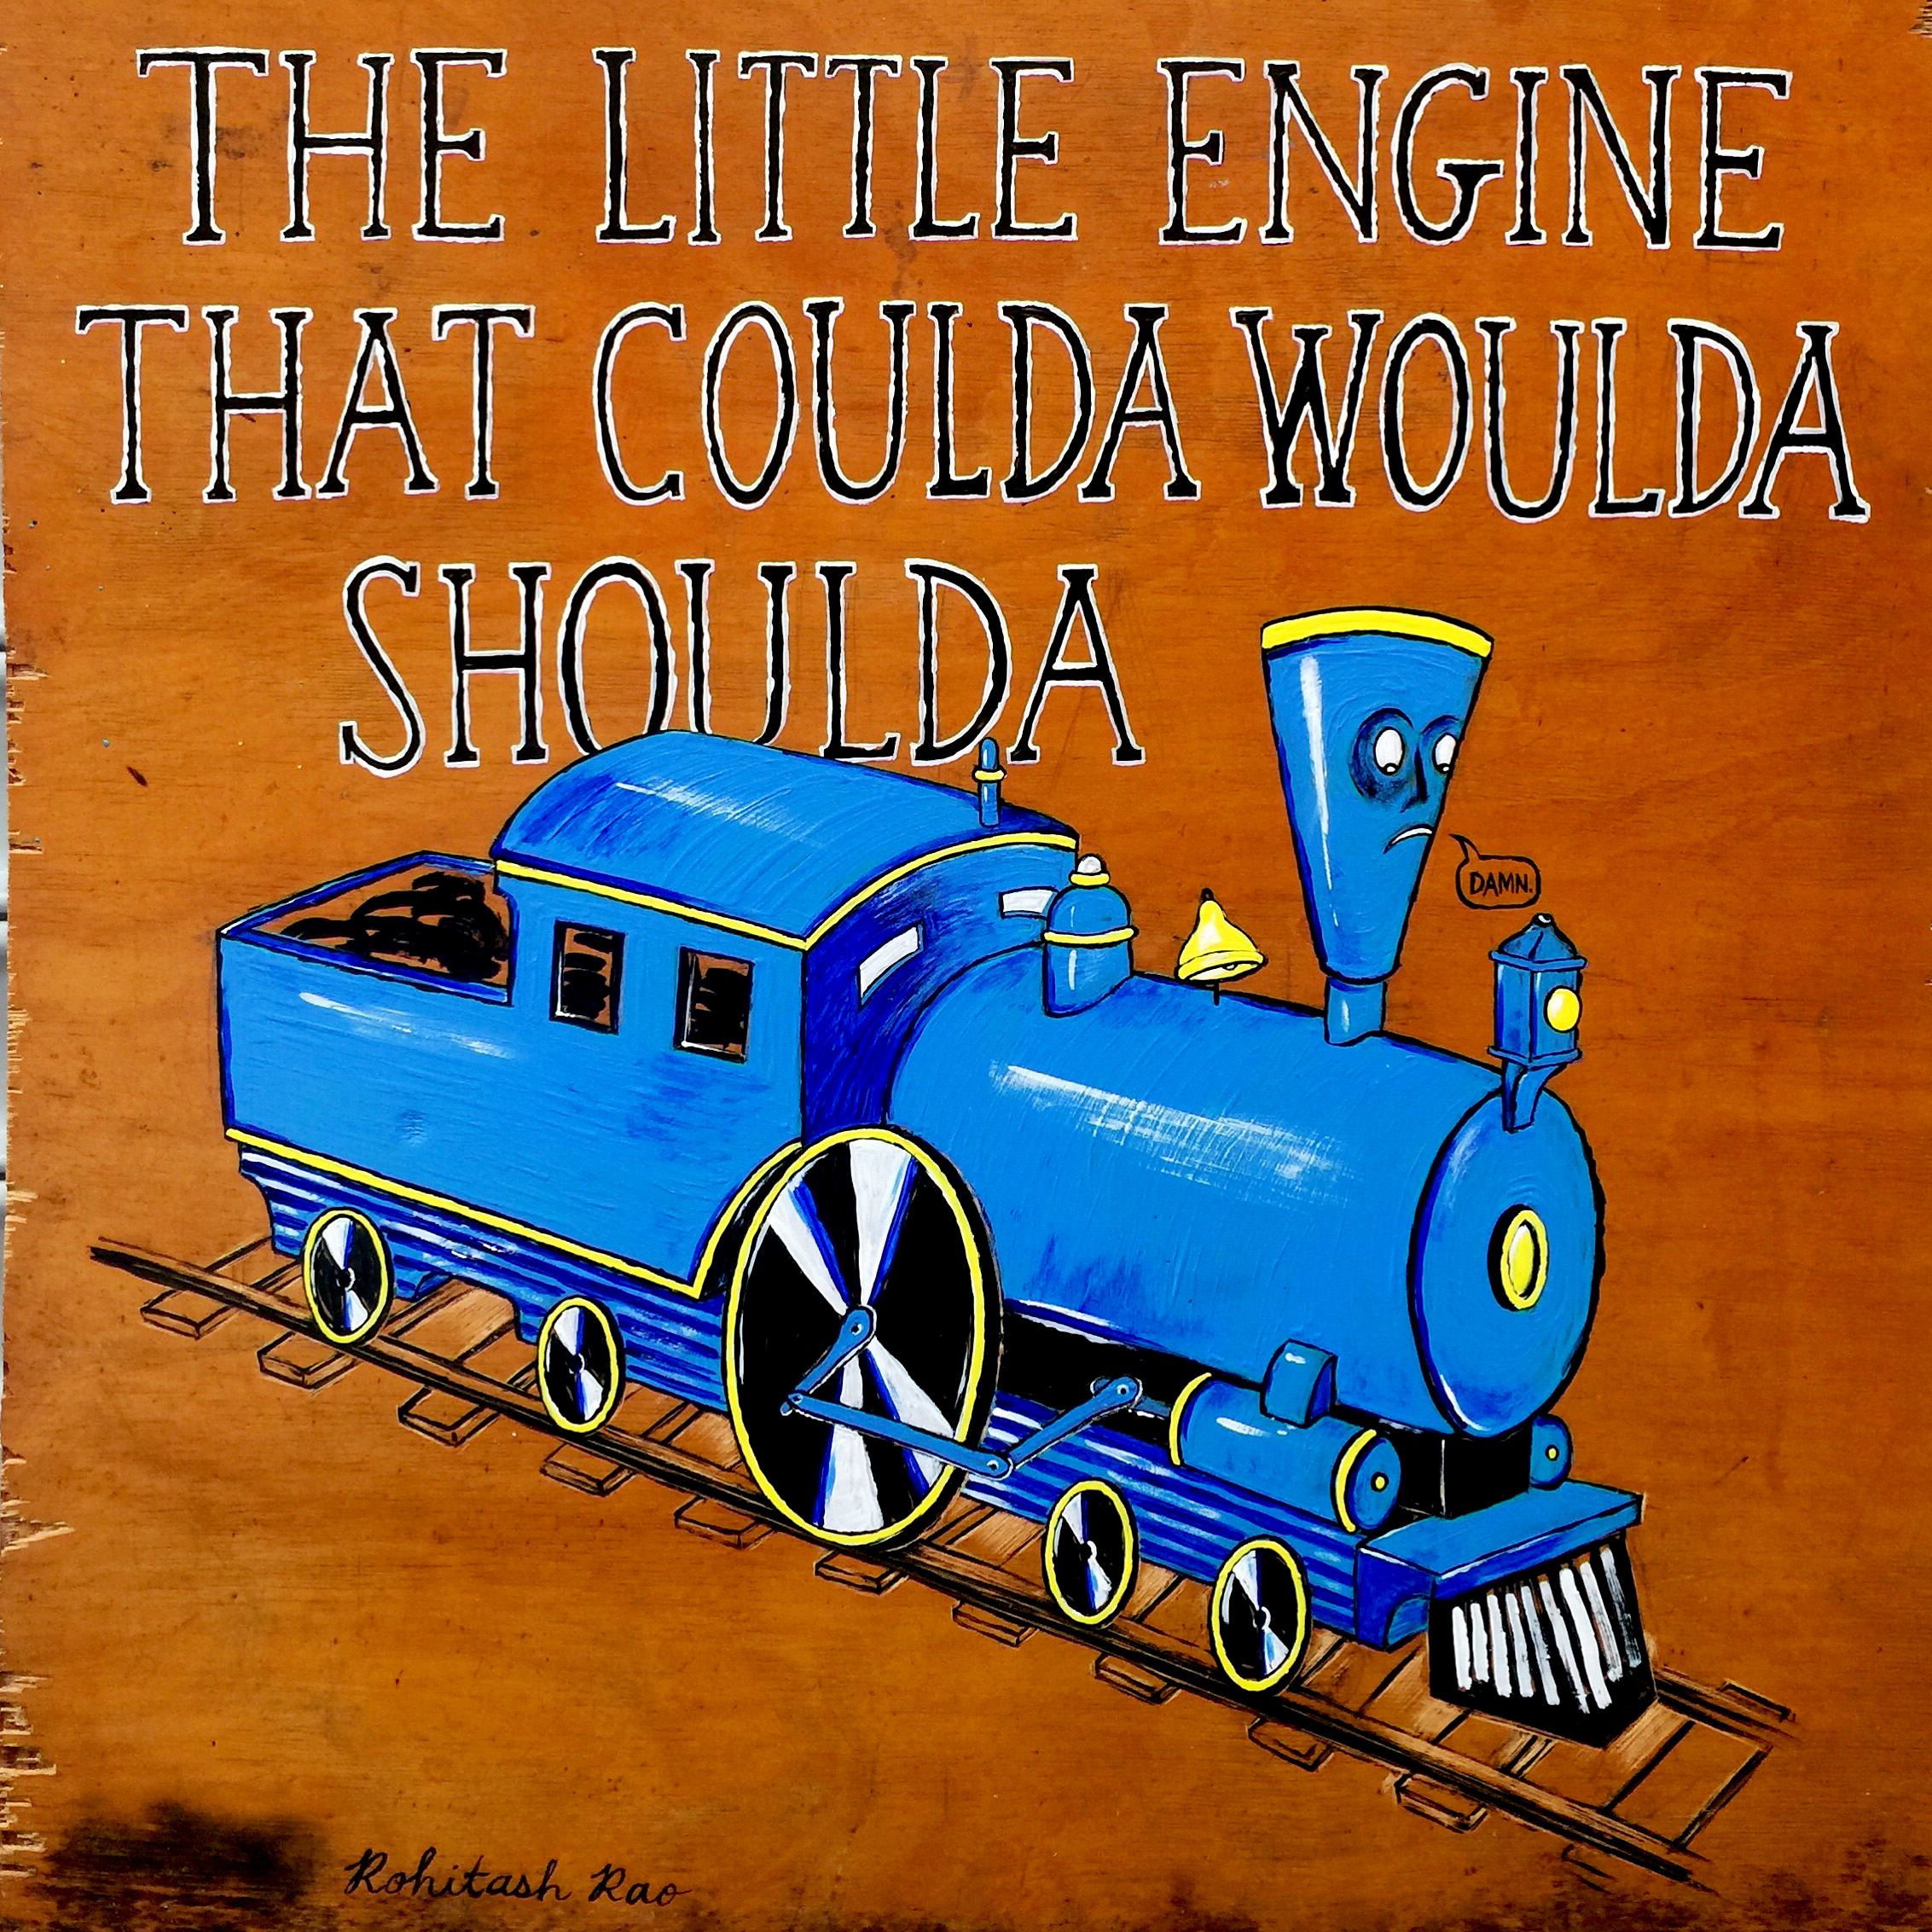 THE LITTLE ENGINE THAT COULDA WOULDA SHOULDA